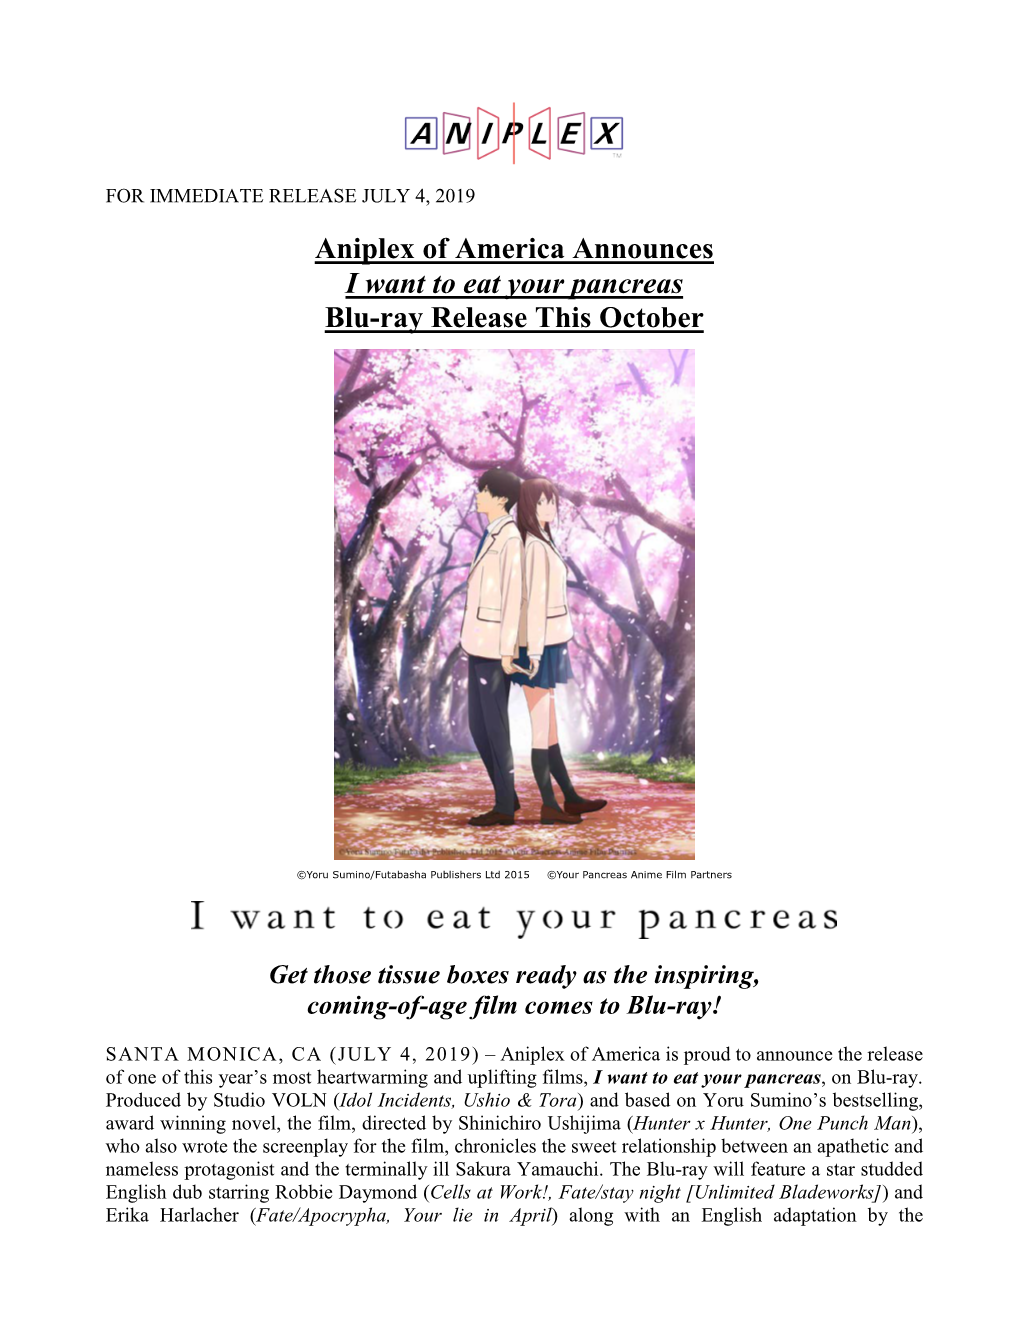 Aniplex of America Announces I Want to Eat Your Pancreas Blu-Ray Release This October